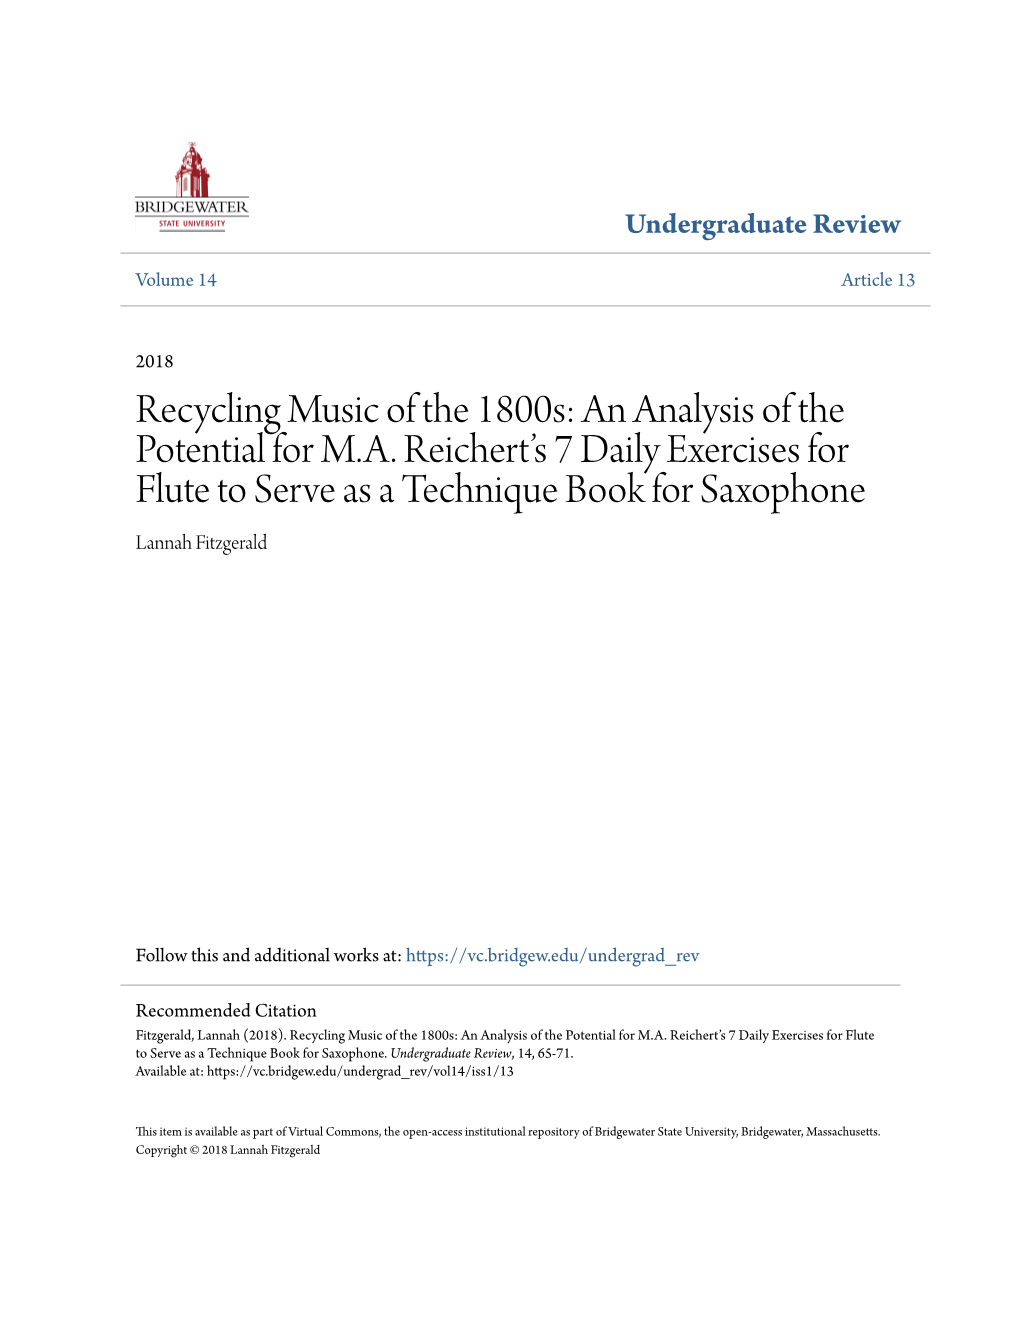 Recycling Music of the 1800S: an Analysis of the Potential for M.A